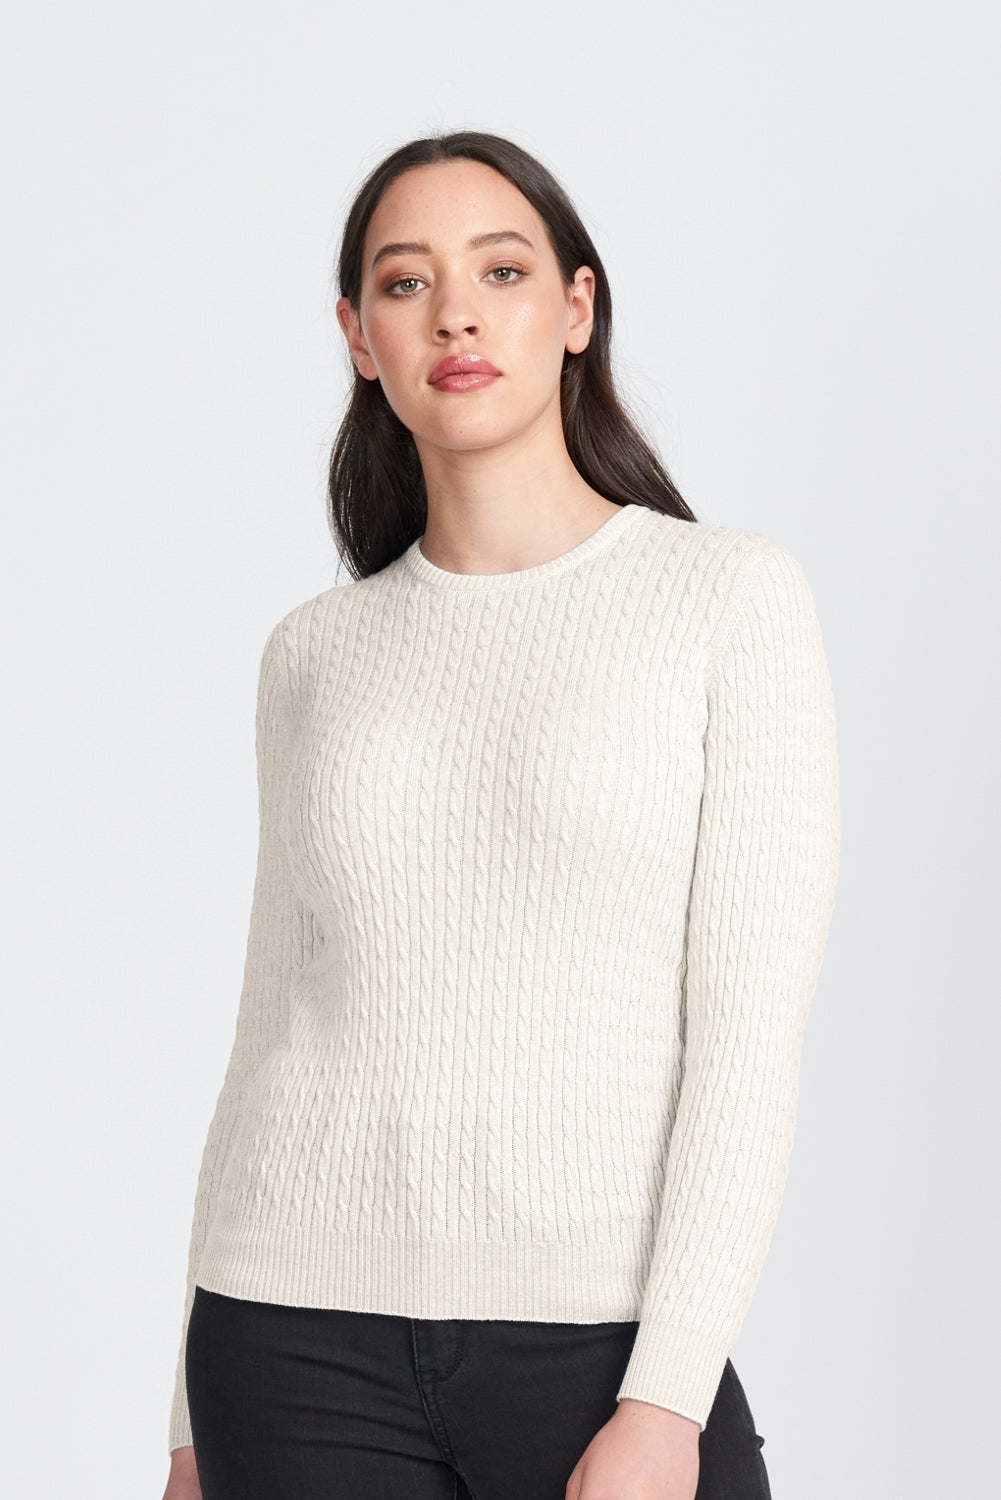 Rib and Cable Crew in Natural by Royal Merino